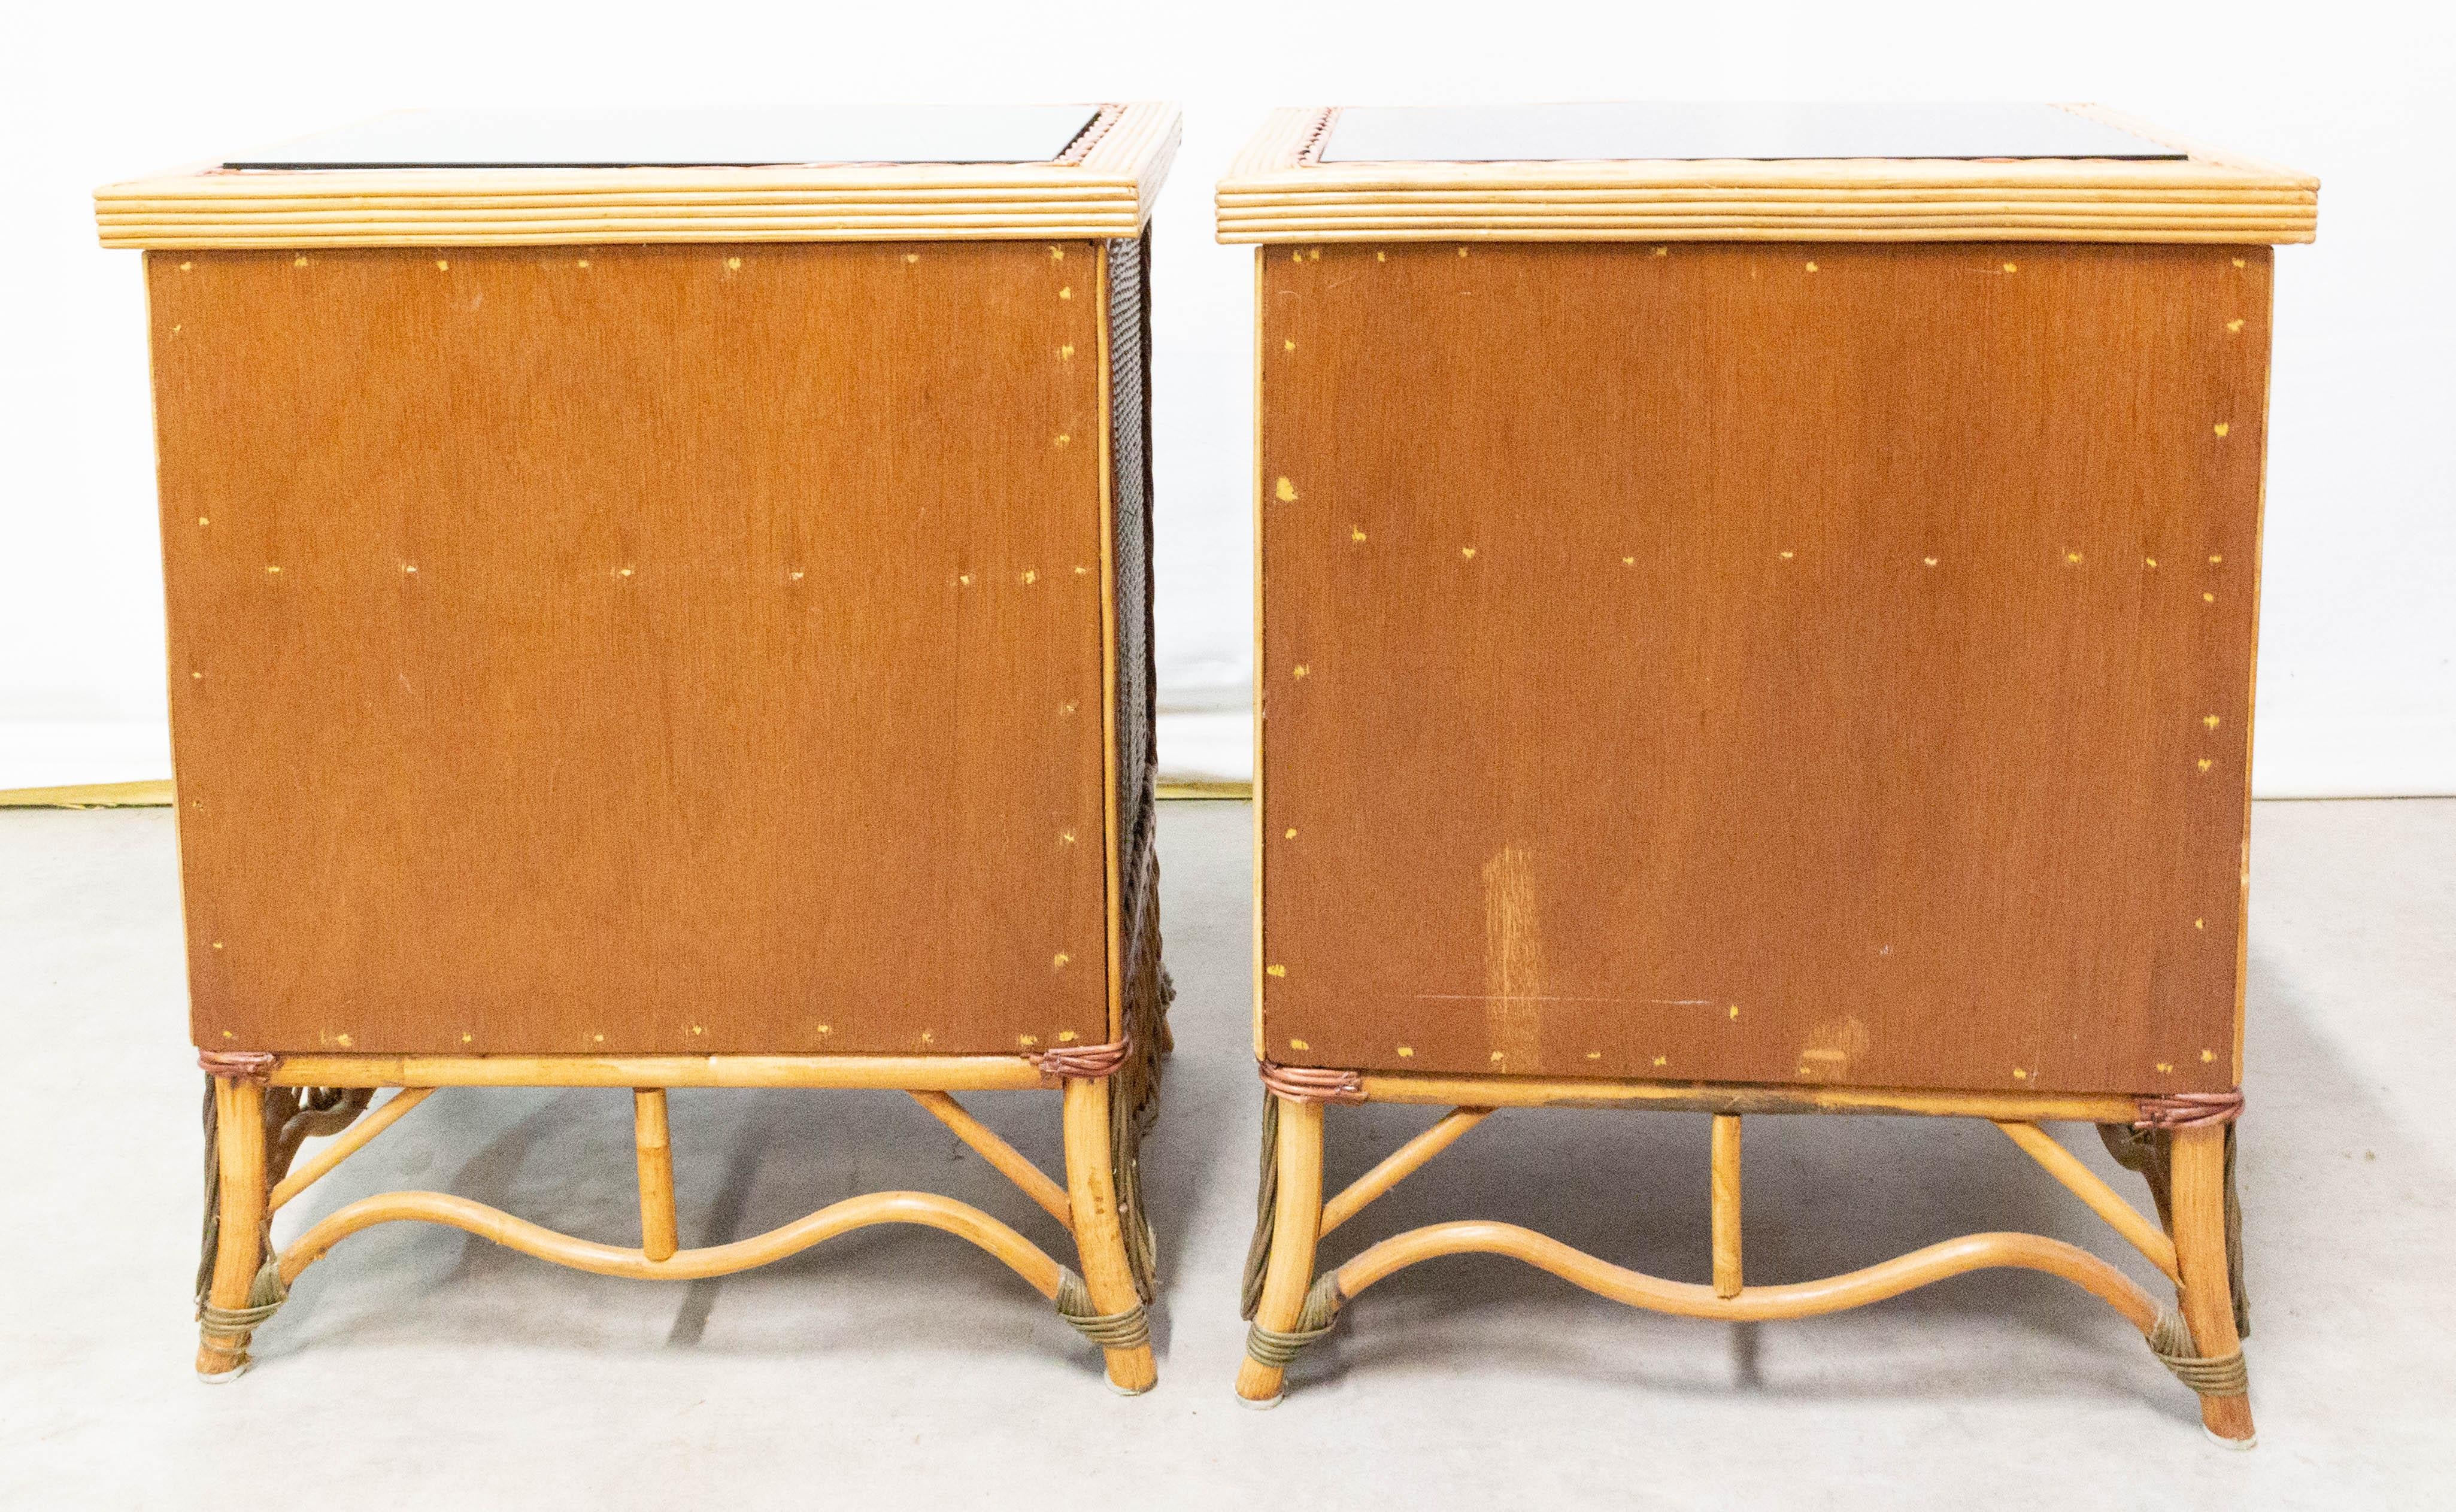 20th Century Pair of Rattan Nightstands Mirror Top Side Cabinets Bedside Tables, French